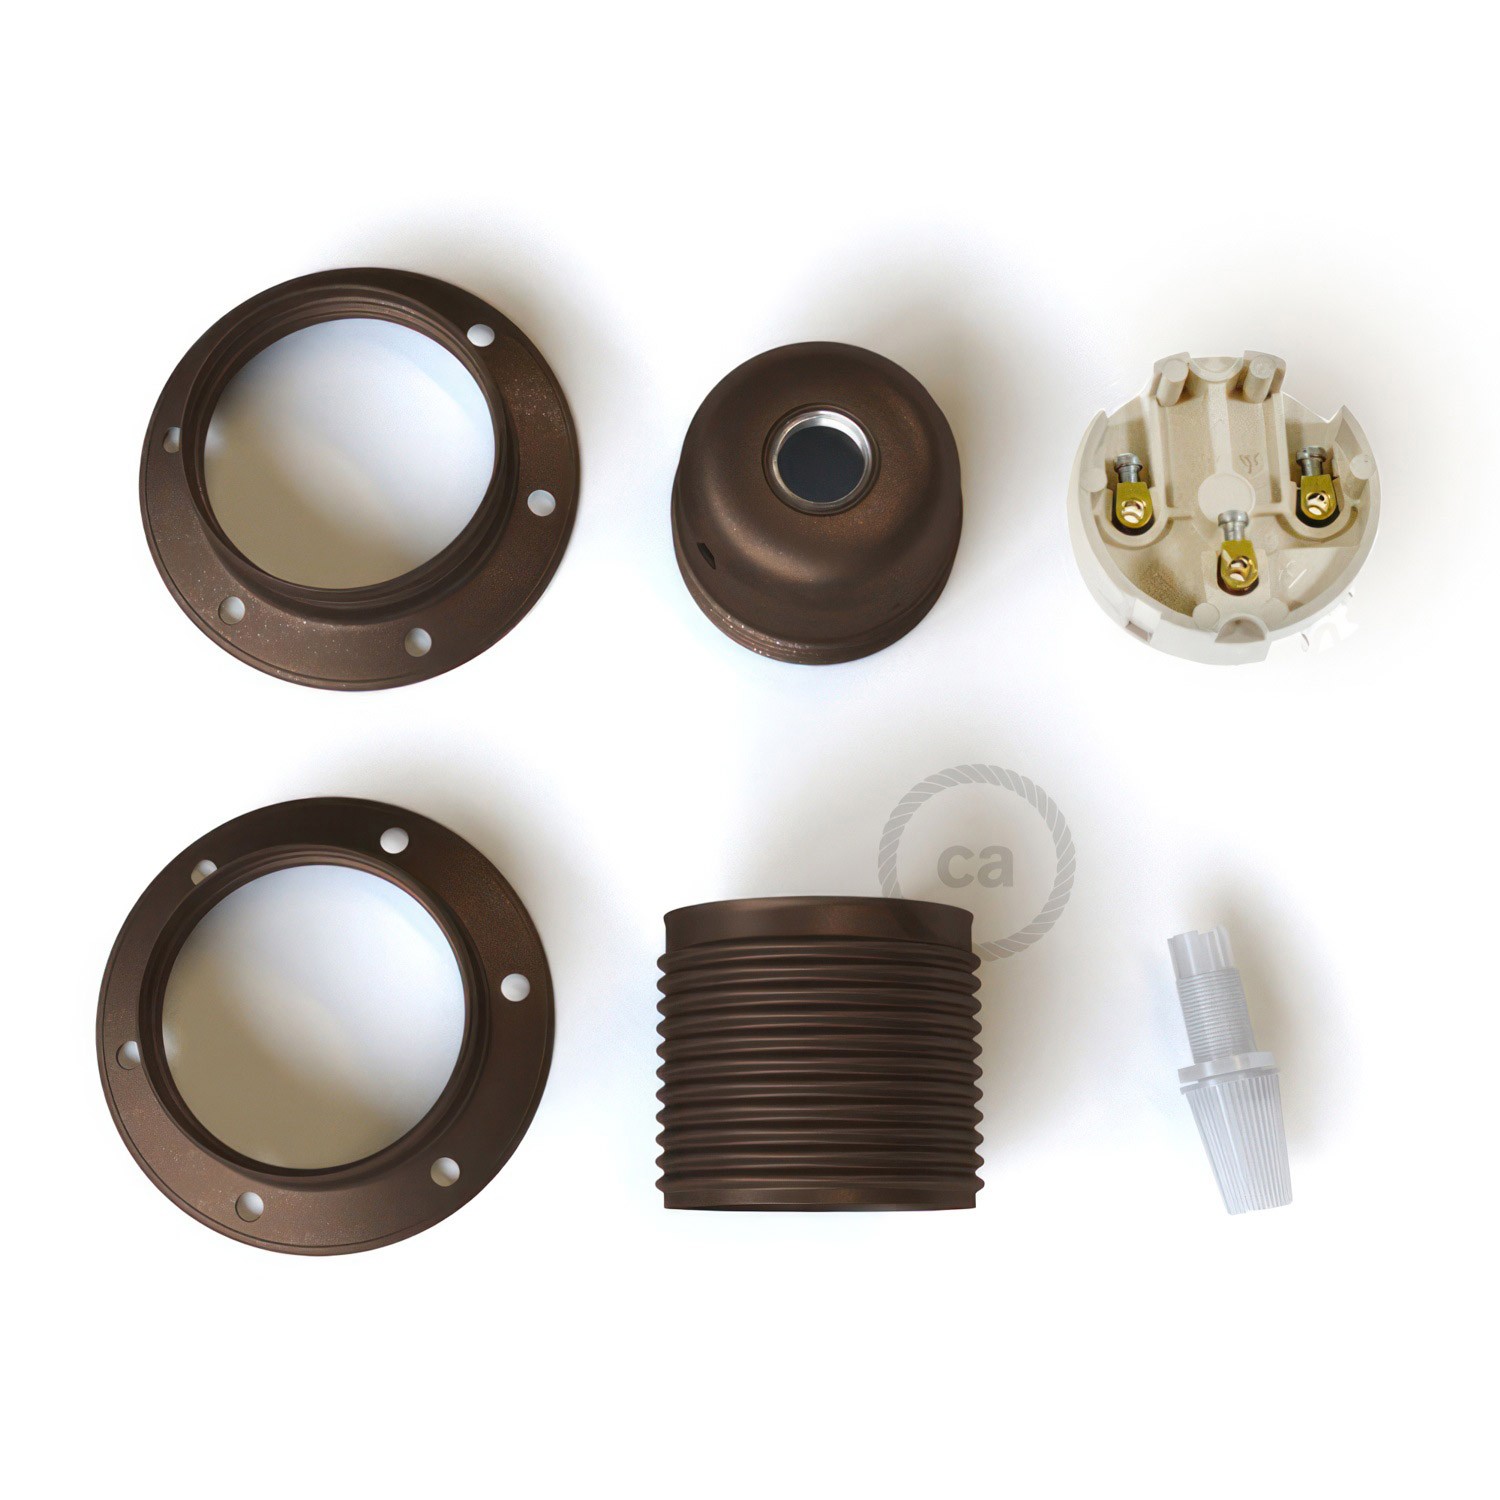 E27 metal lamp holder kit with double ring nut for lampshade